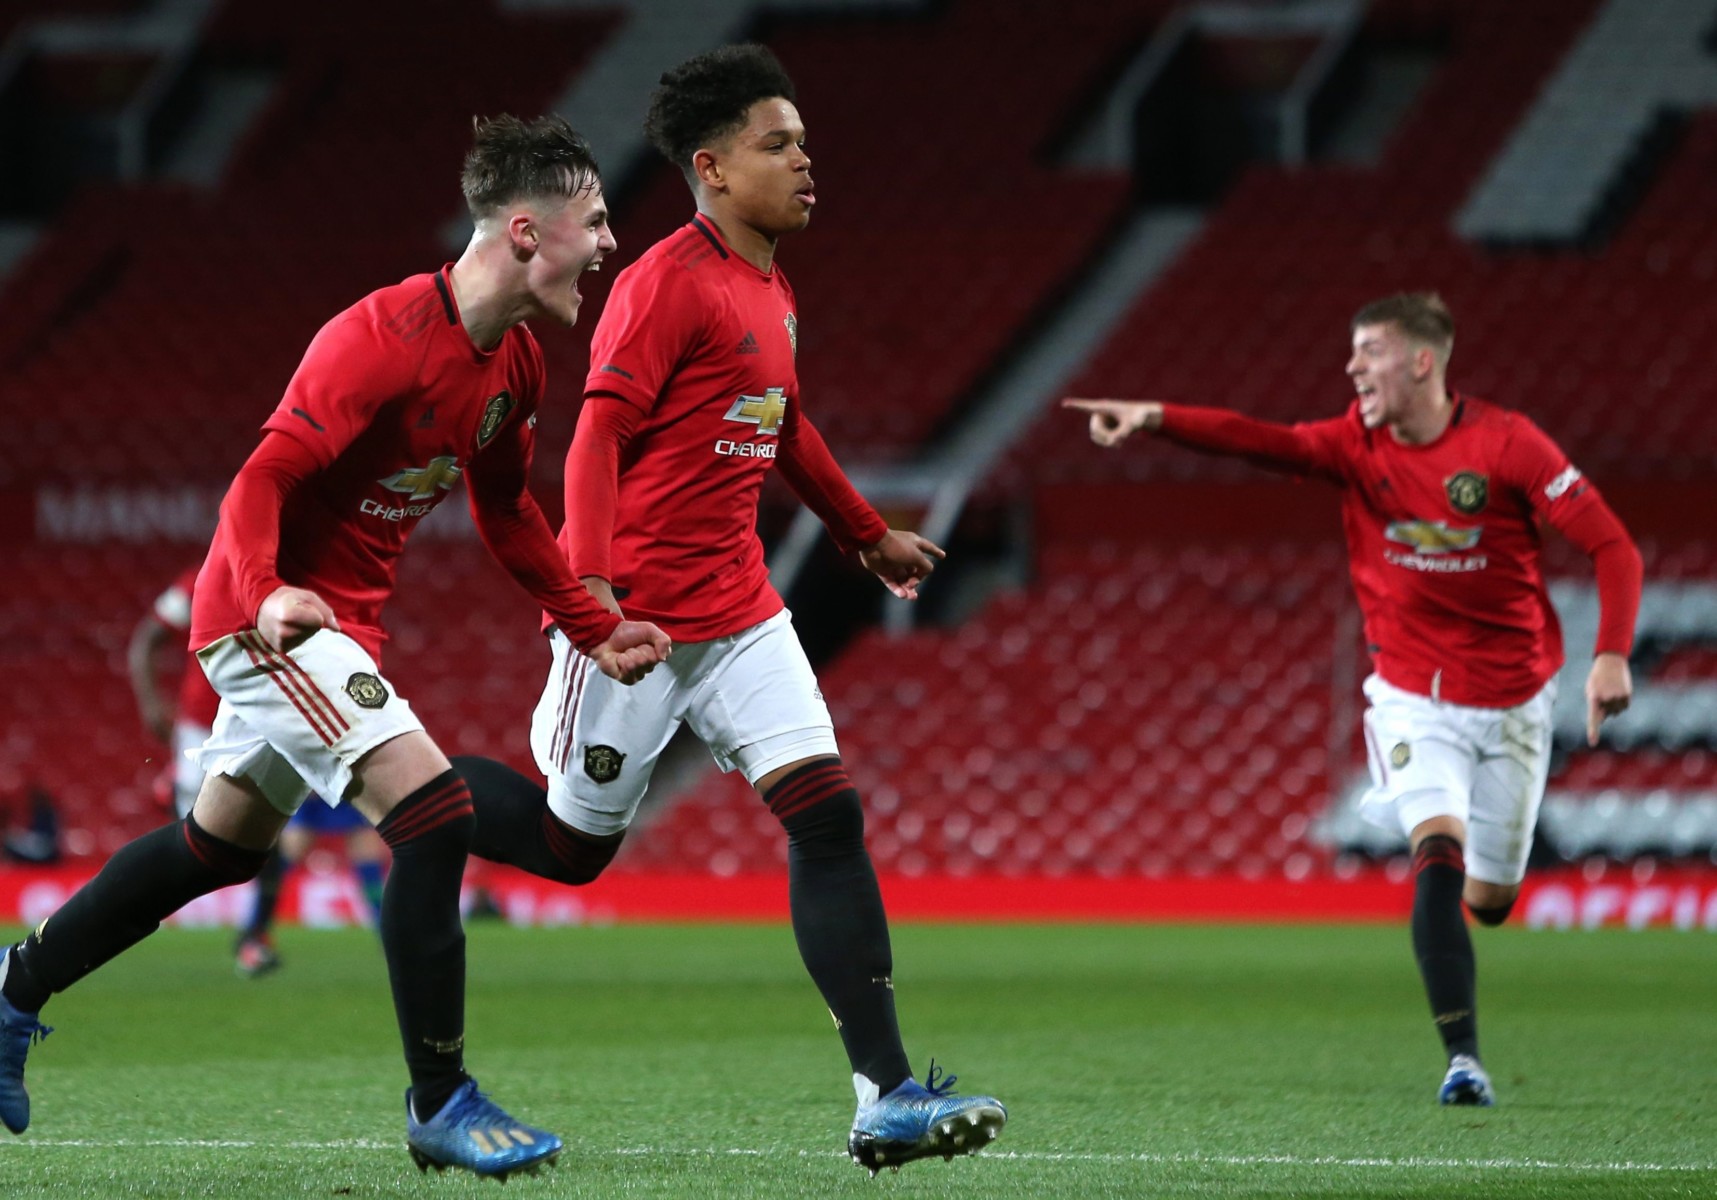 Last week Shoretire scored his first goal at Old Trafford in the FA Youth Cup against Wigan